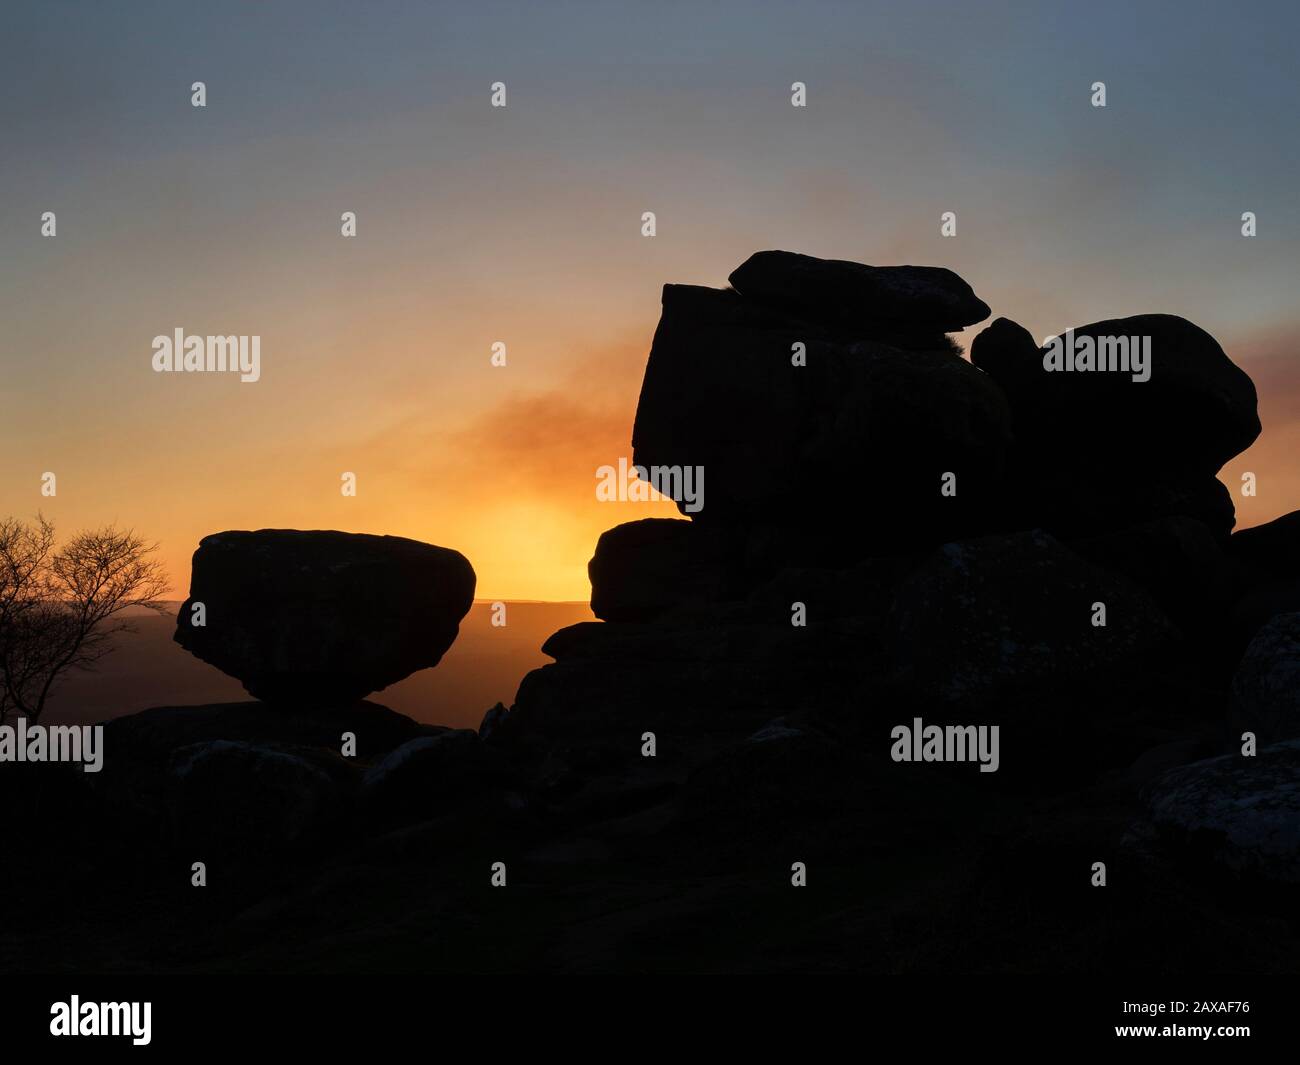 Gristone rock formations silhouetted against a sunset sky at Brimham Moor Nidderdale AONB North Yorkshire England Stock Photo